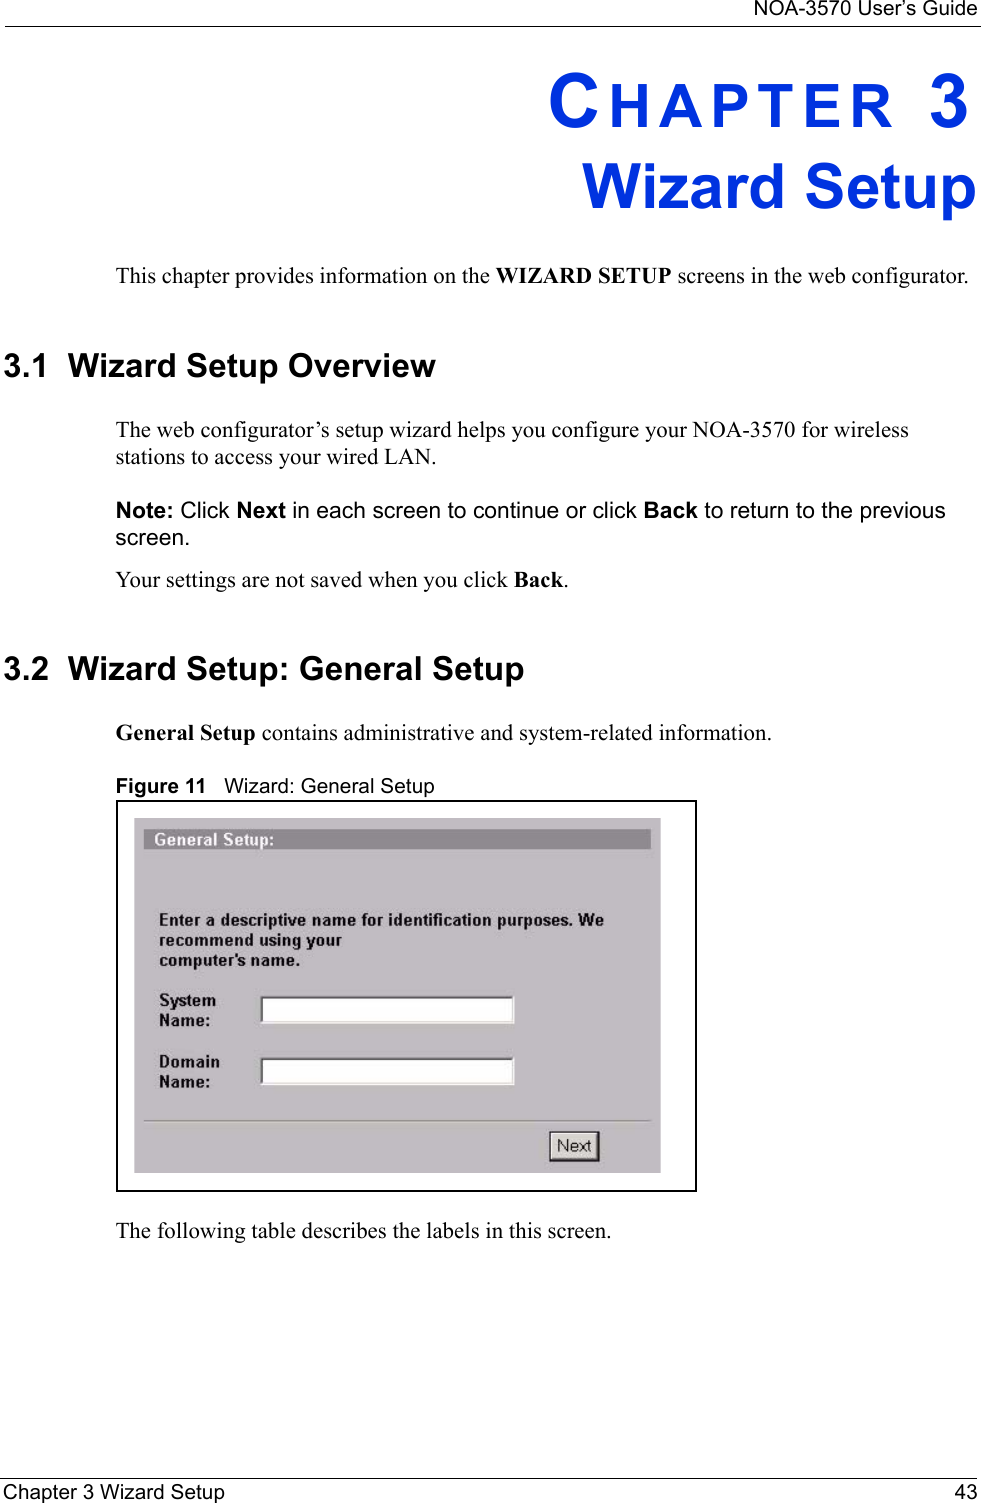 NOA-3570 User’s GuideChapter 3 Wizard Setup 43CHAPTER 3Wizard SetupThis chapter provides information on the WIZARD SETUP screens in the web configurator.3.1  Wizard Setup OverviewThe web configurator’s setup wizard helps you configure your NOA-3570 for wireless stations to access your wired LAN. Note: Click Next in each screen to continue or click Back to return to the previous screen. Your settings are not saved when you click Back.3.2  Wizard Setup: General SetupGeneral Setup contains administrative and system-related information. Figure 11   Wizard: General SetupThe following table describes the labels in this screen.